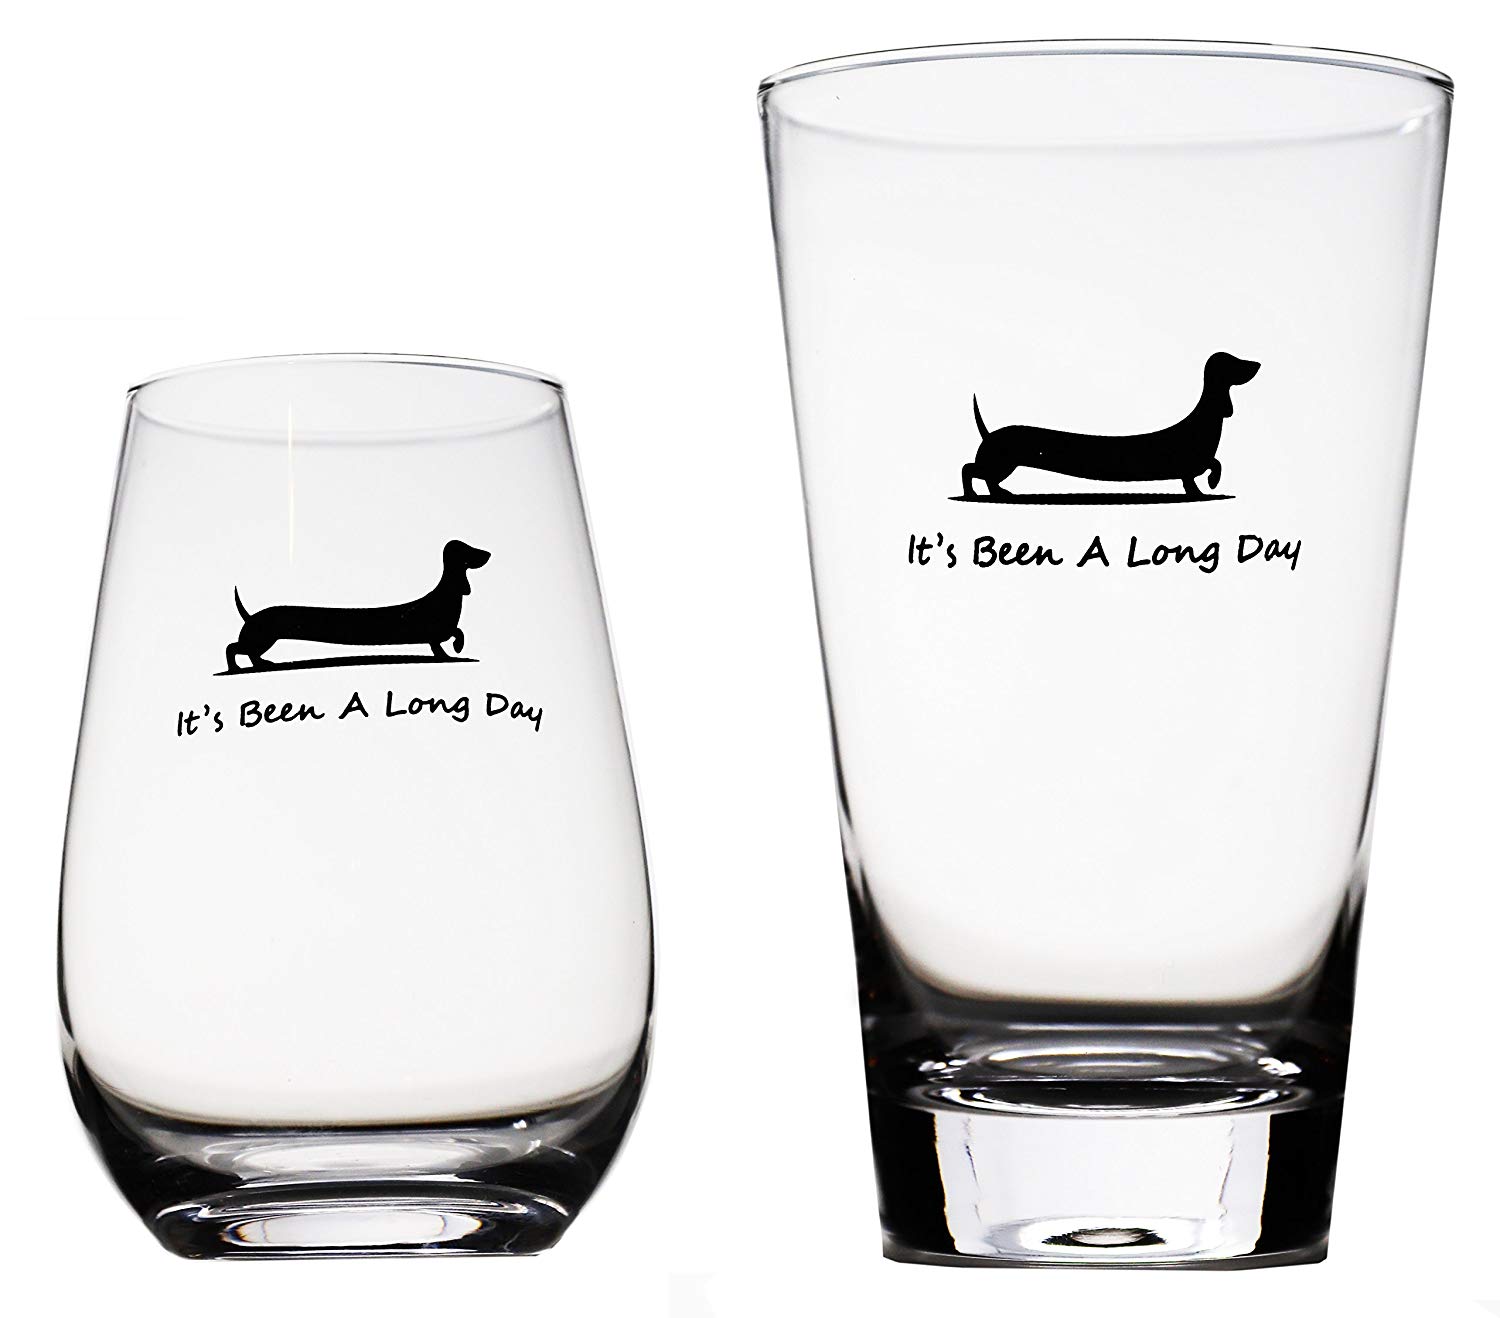 A novelty beer glass and white glass with Dachshund print and message - It's been a long day